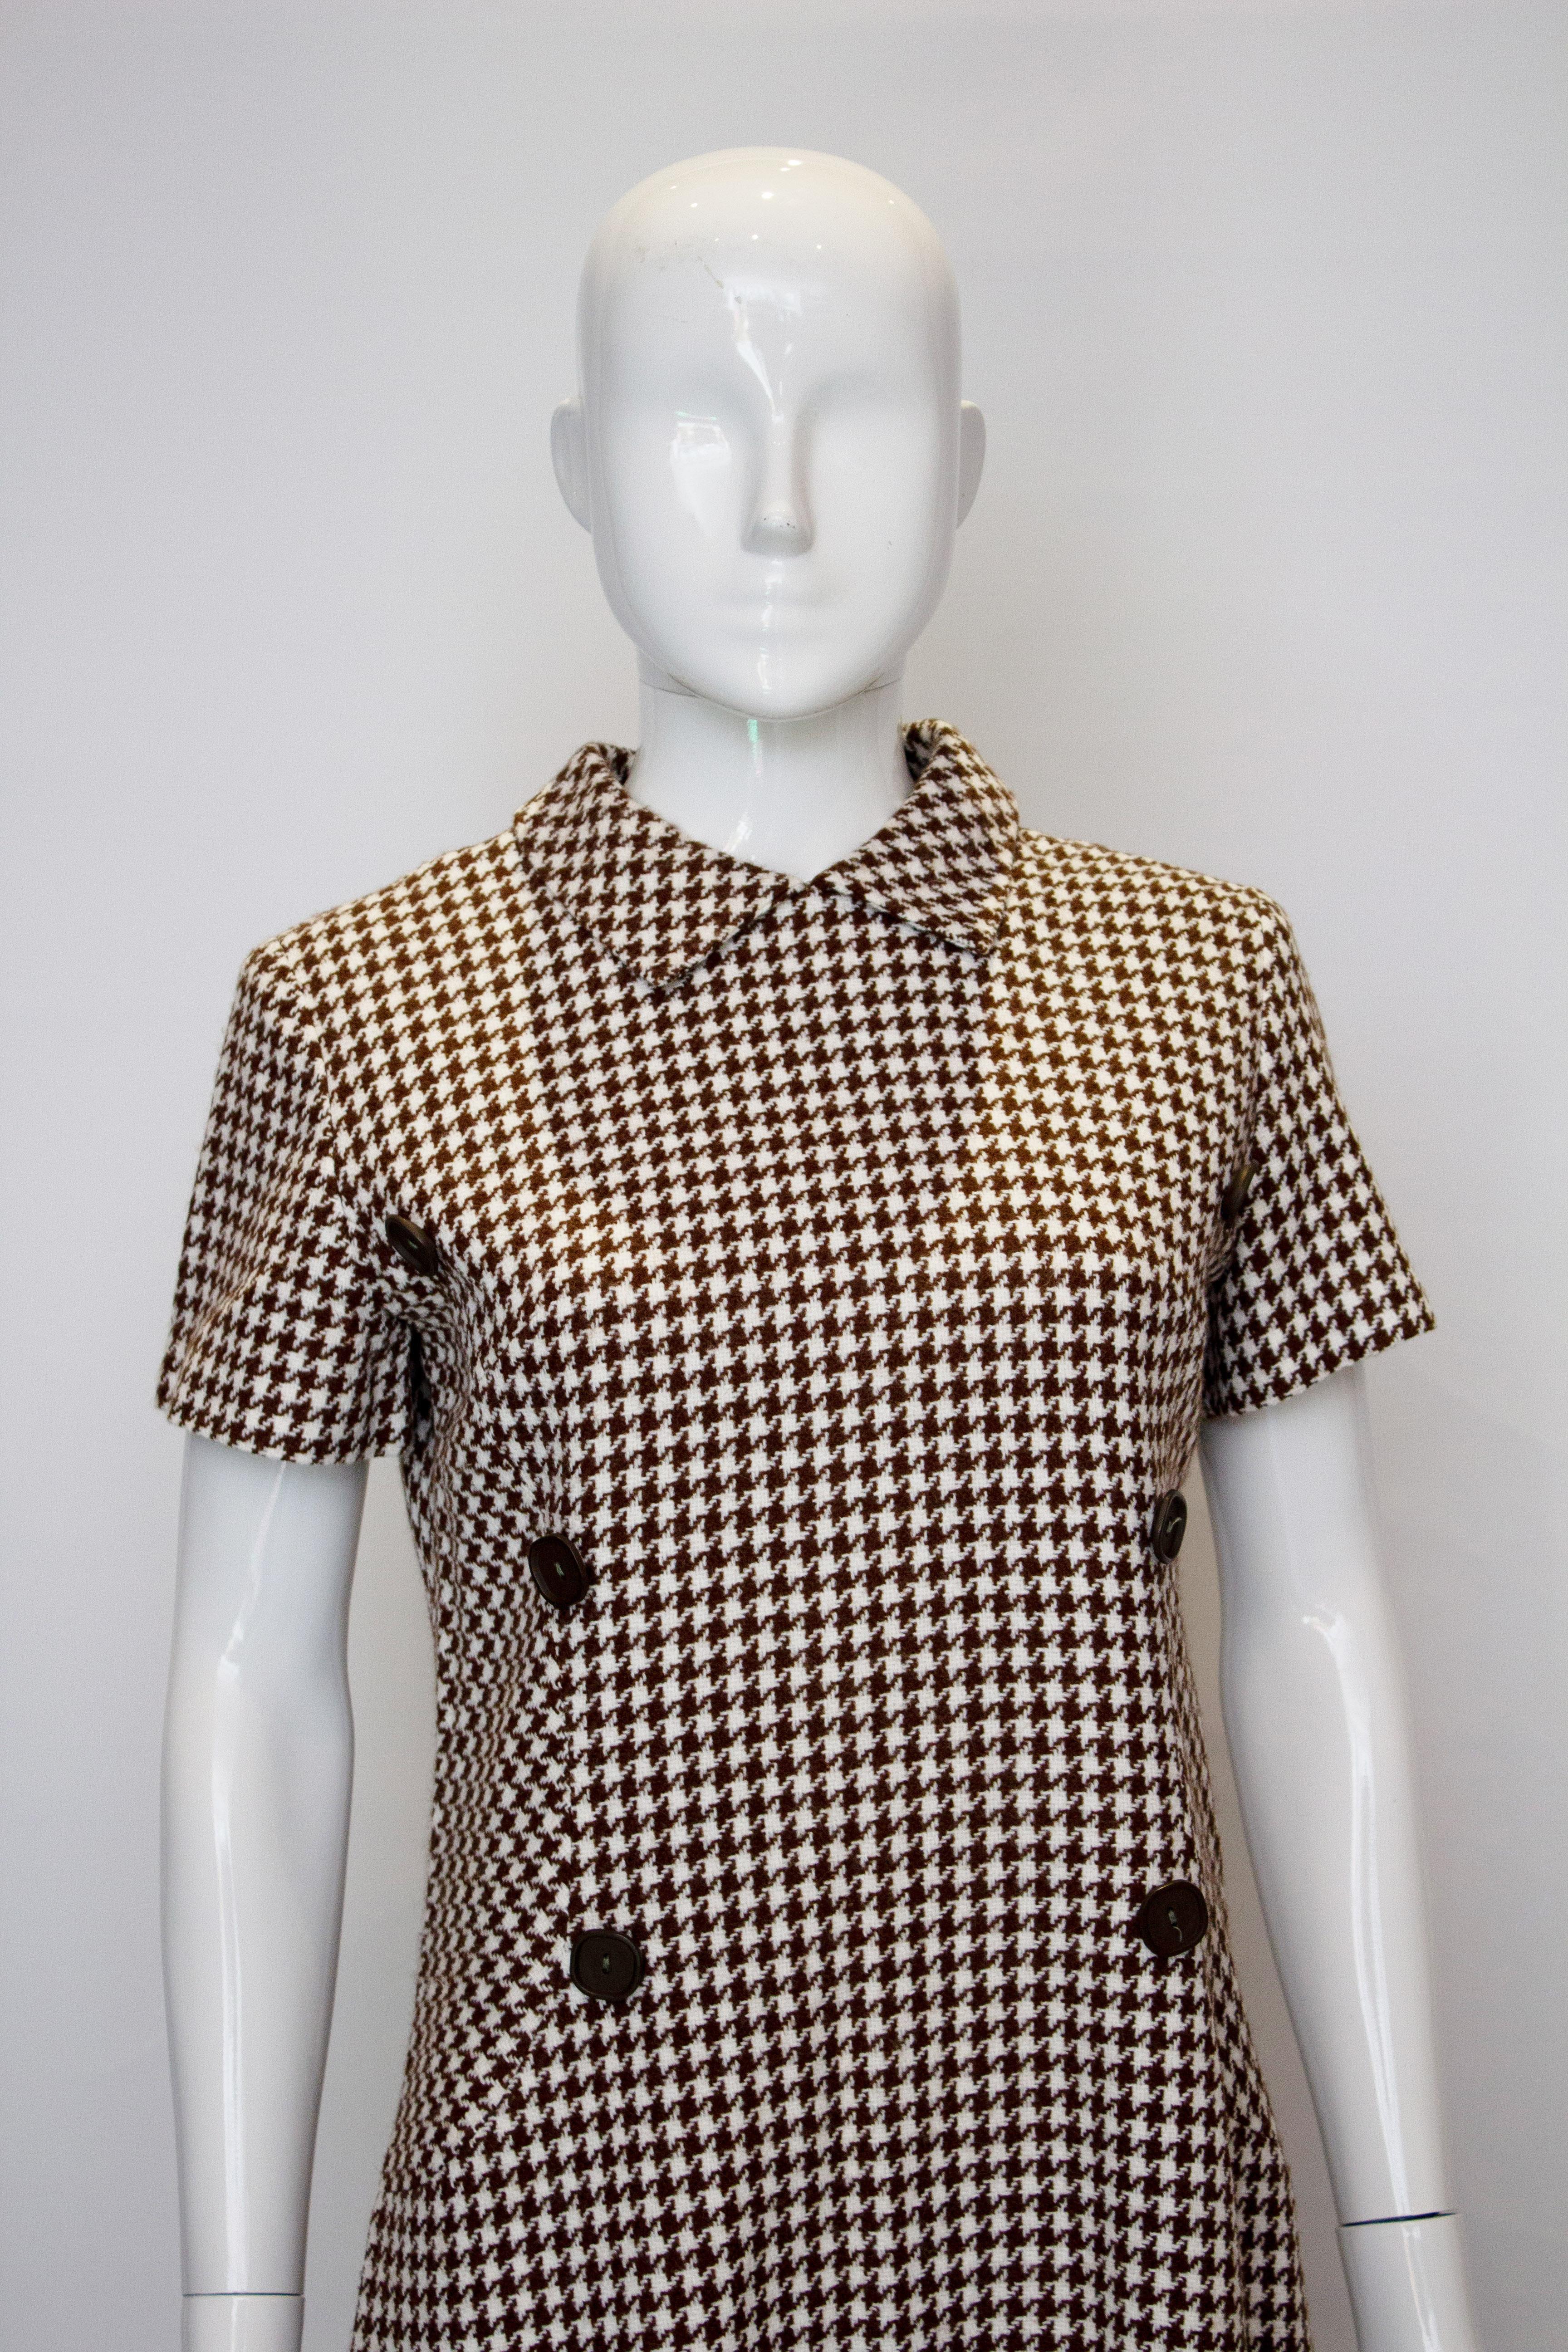 A chic day dress by Nancy Green in brown and white houndstooth. The dress has a central back zip opening and six decorative buttons on the front.